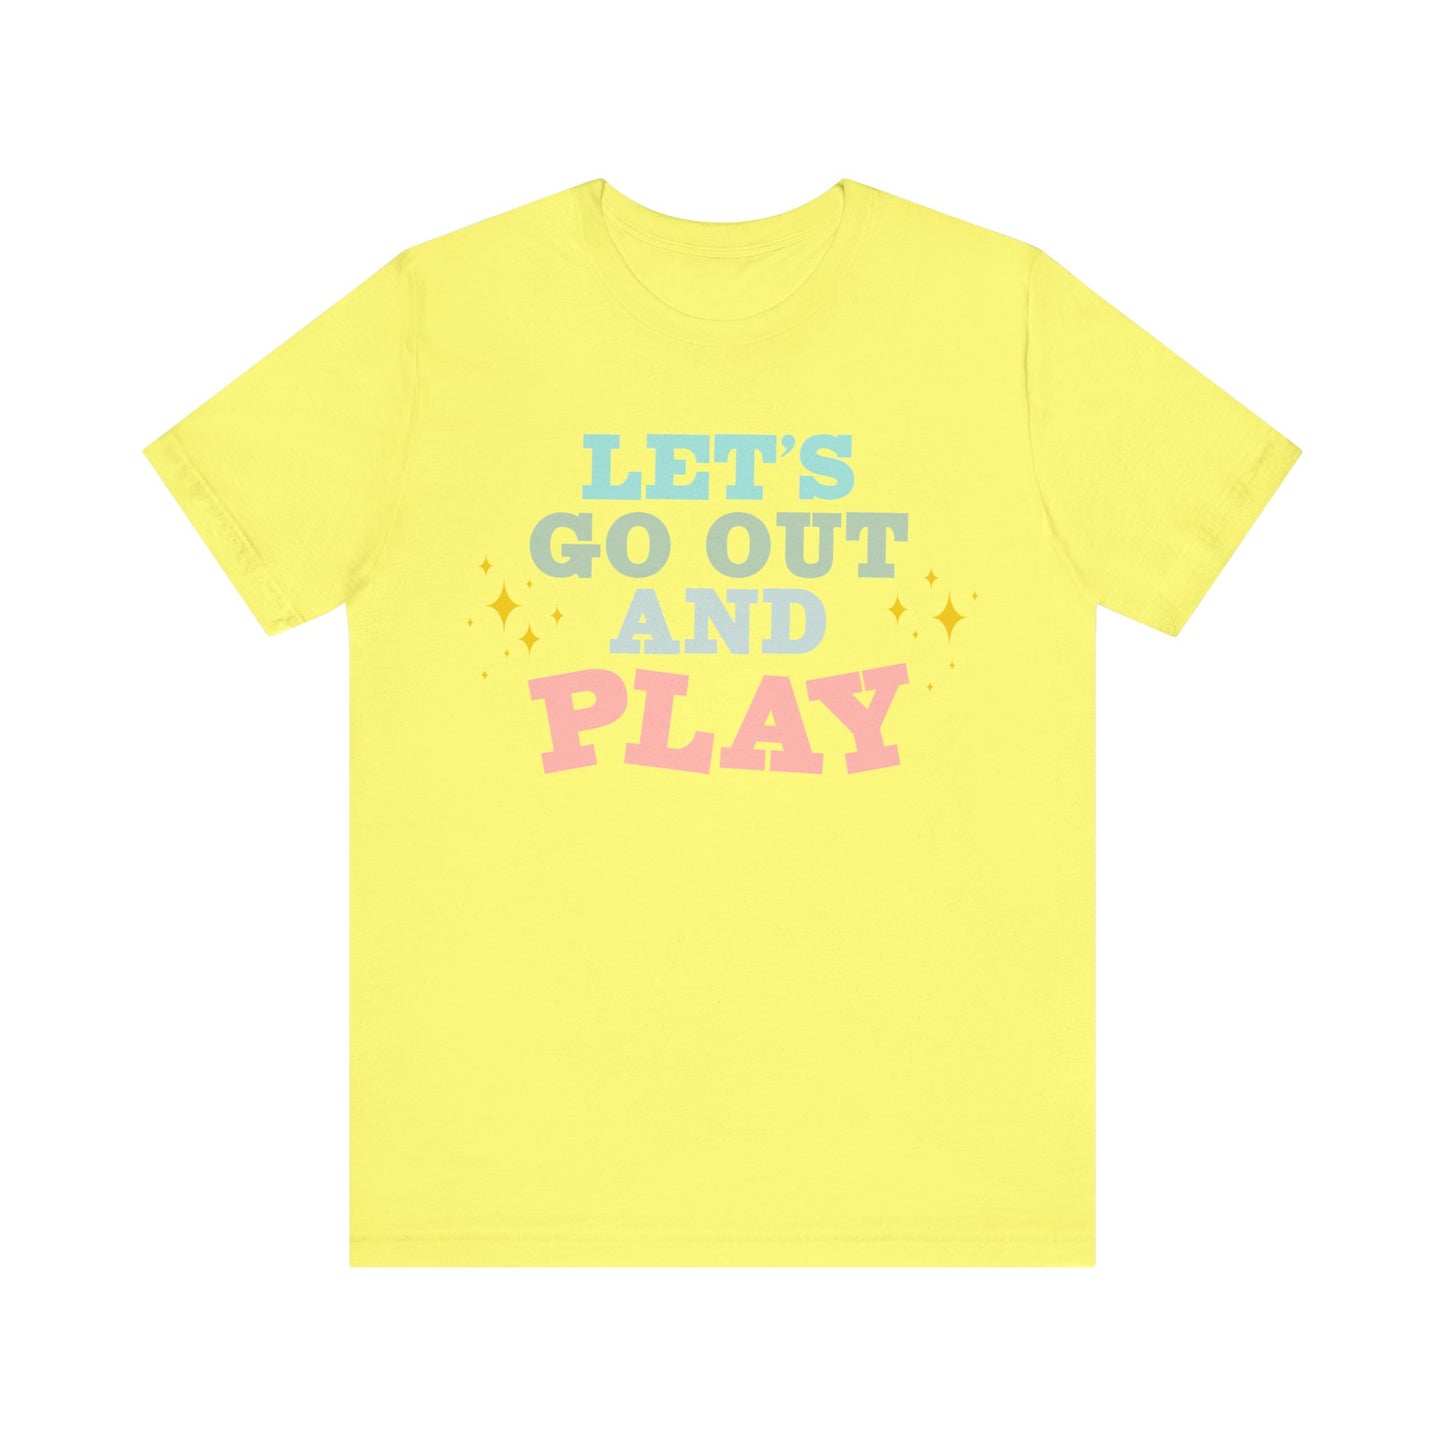 Let's Go Out And Play Shirt, Occupational Therapy Shirt, Therapist Shirt